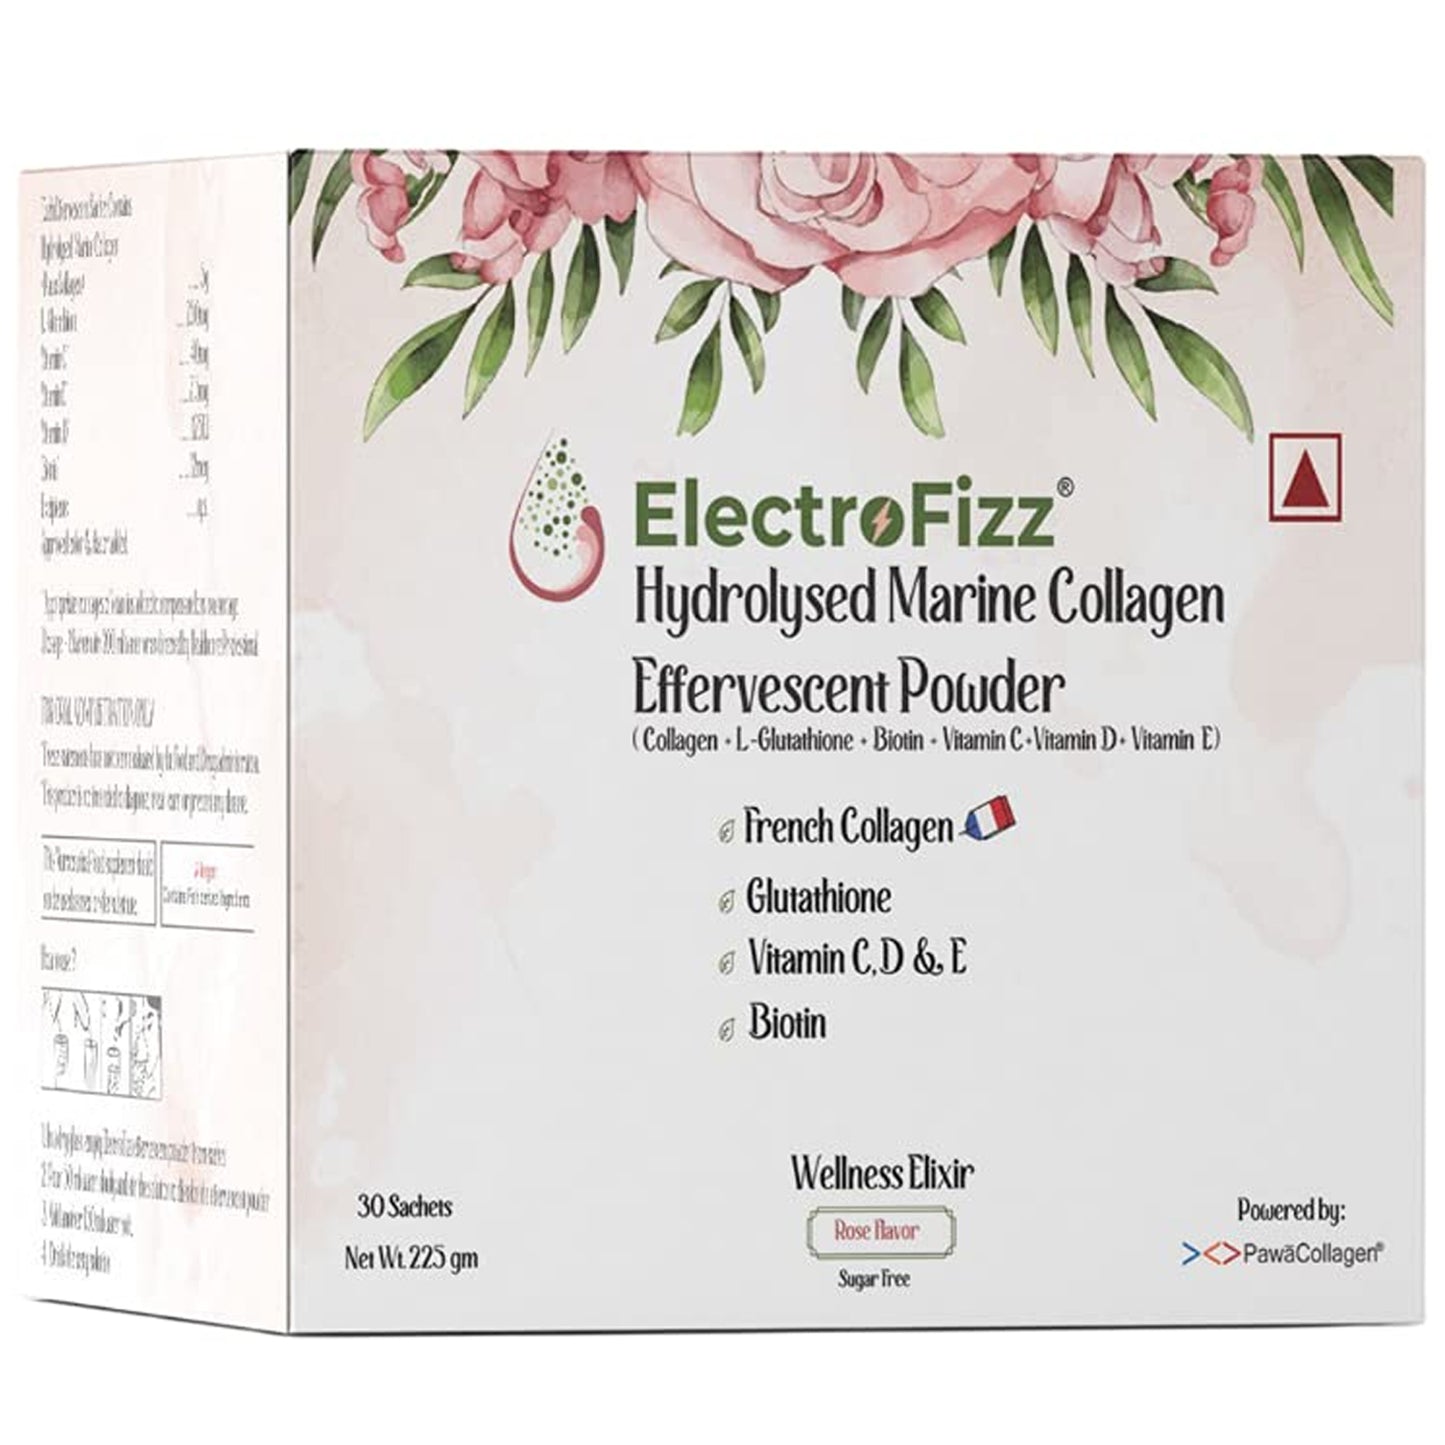 ElectroFizz French Collagen in Rose Flavour, 30 Sachets